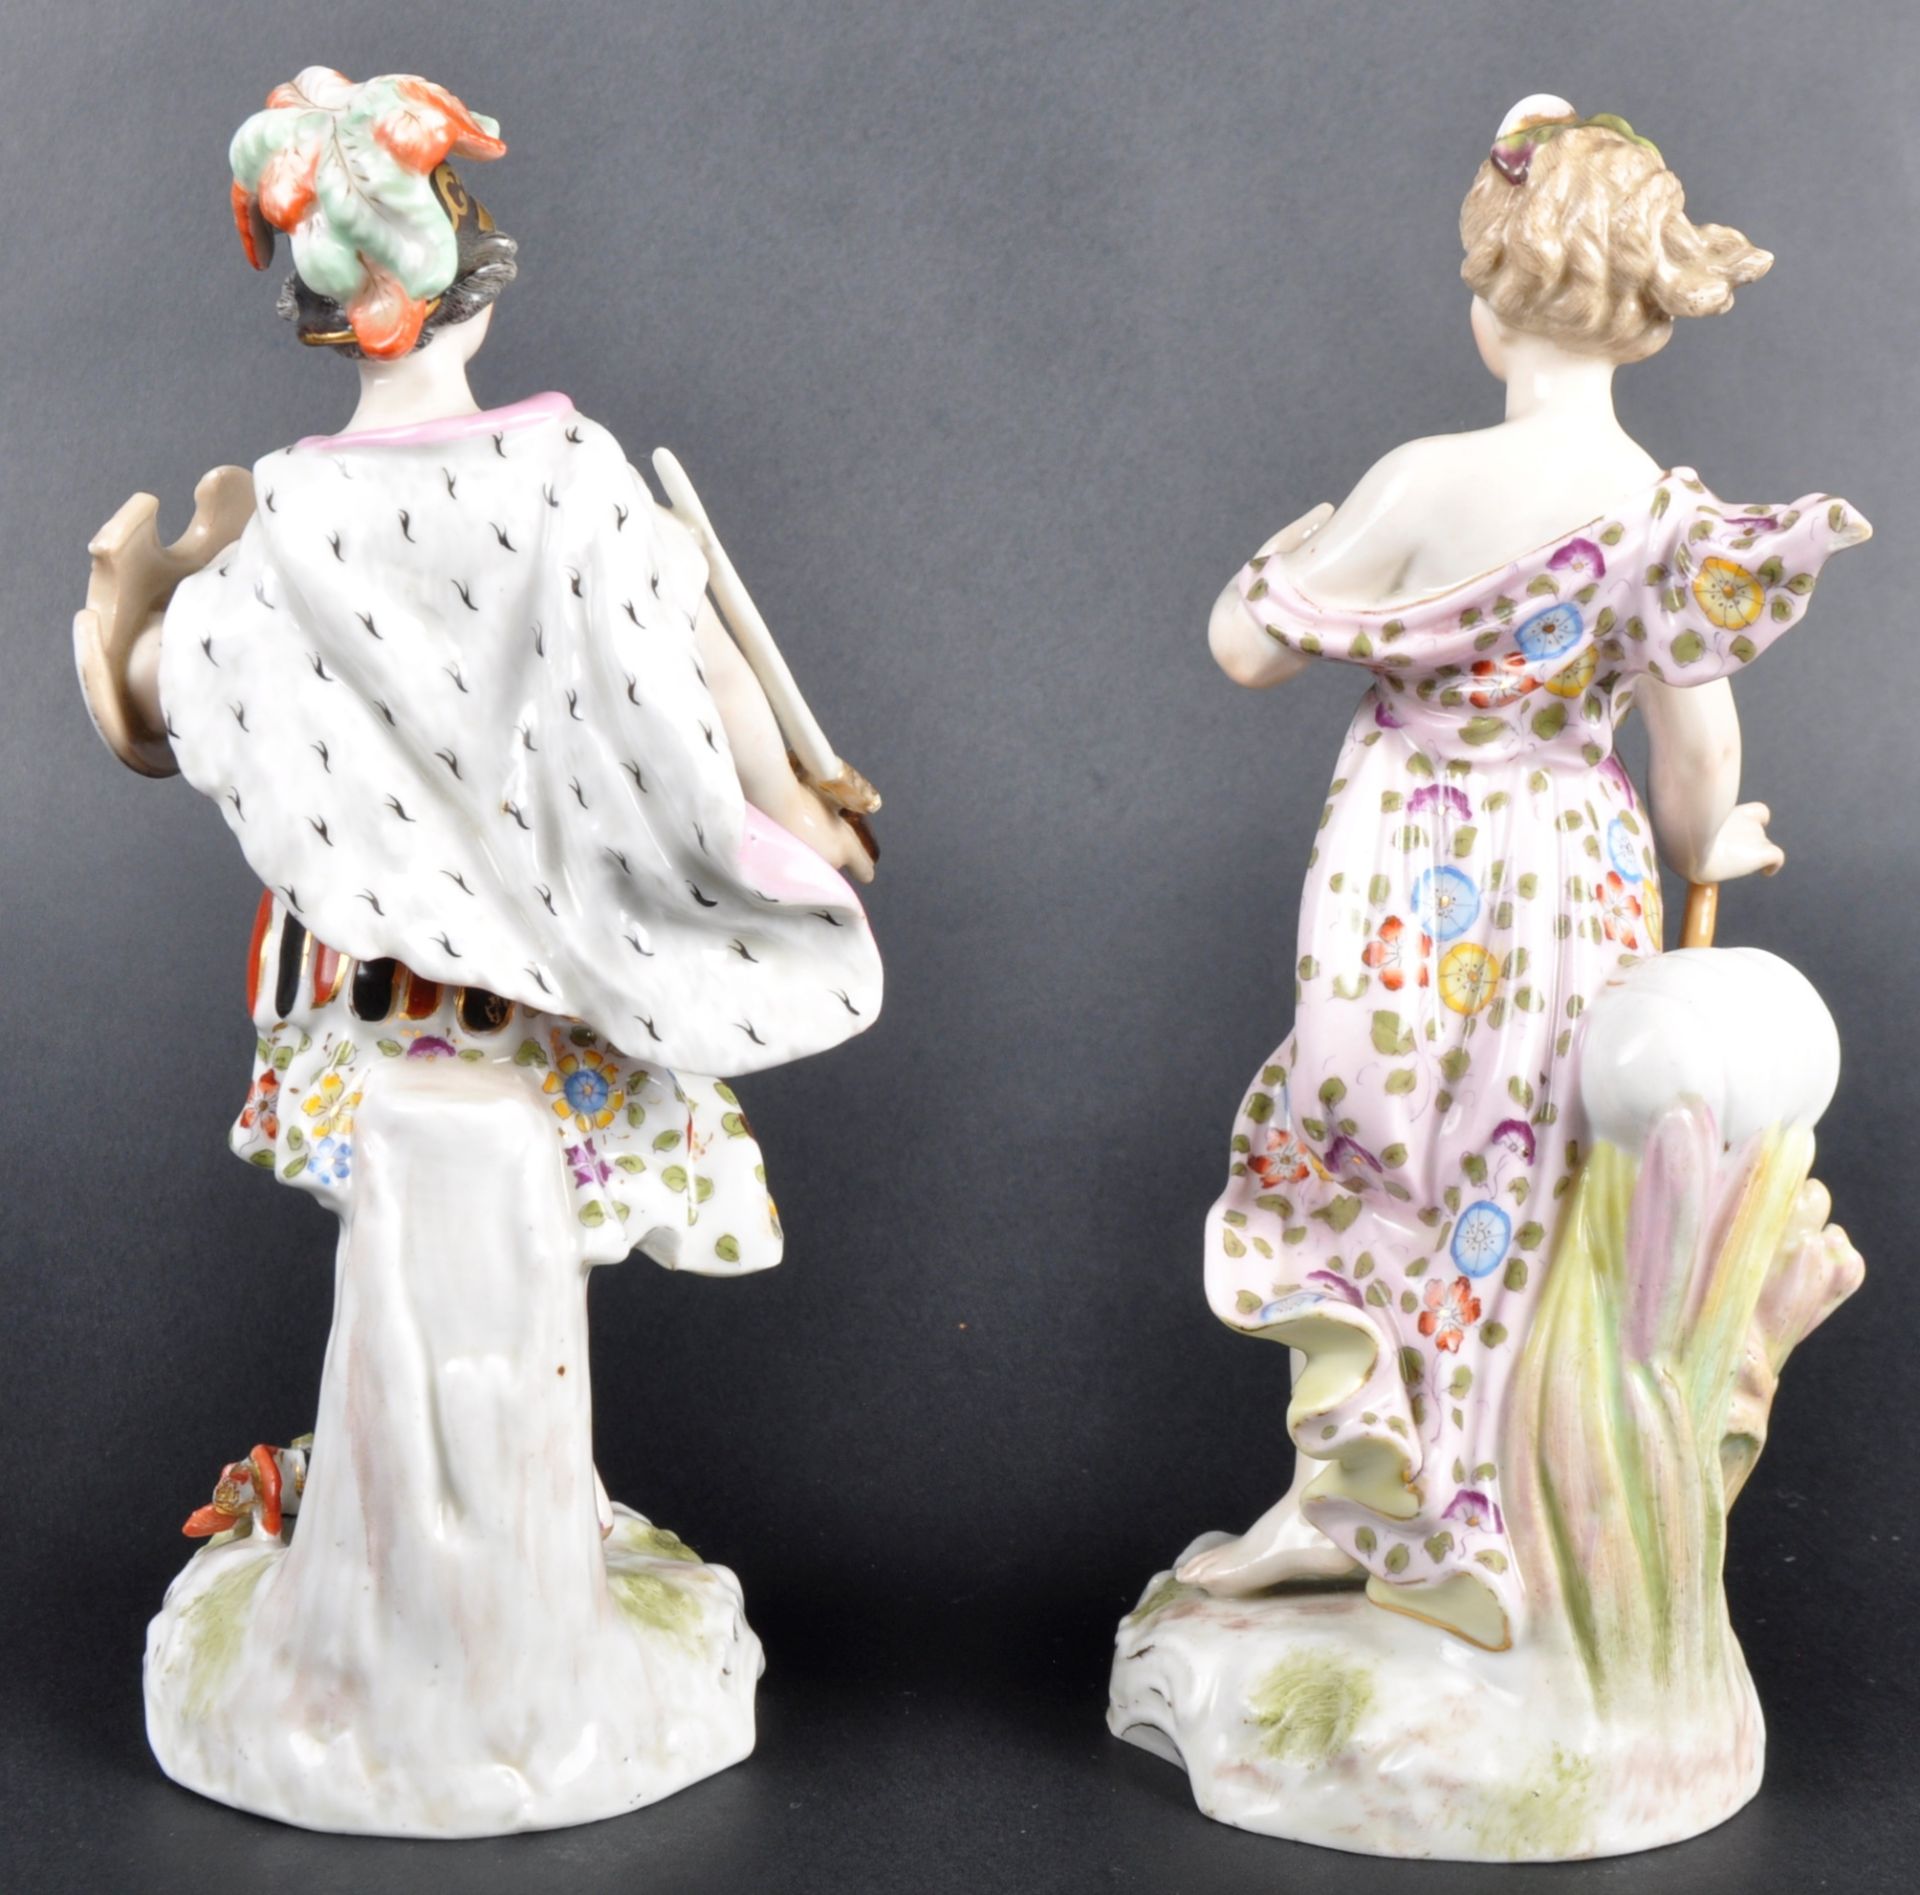 PAIR OF 19TH CENTURY DRESDEN PORCELAIN FIGURINES - Image 3 of 6